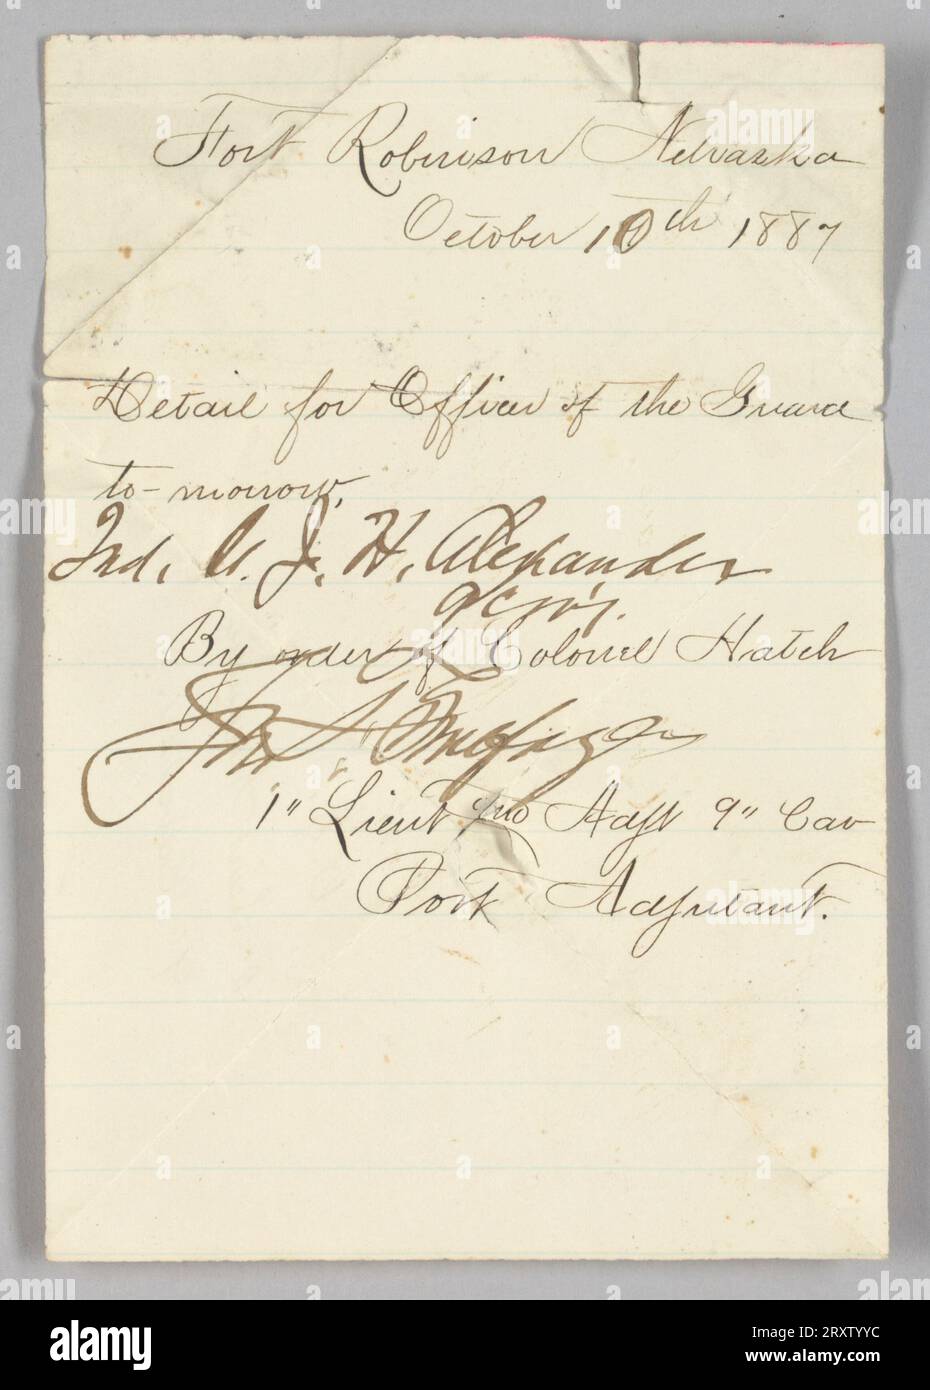 Hand-written order issued to second lieutenant John Hanks Alexander to report for Officers of the Guard duty at Fort Robinson, Nebraska on October 10, 1887. The document was written by an unidentified first lieutenant by order of Colonel Edward Hatch. The document was written in black ink on white paper and has several creases. Both sides of the document have writing. Stock Photo